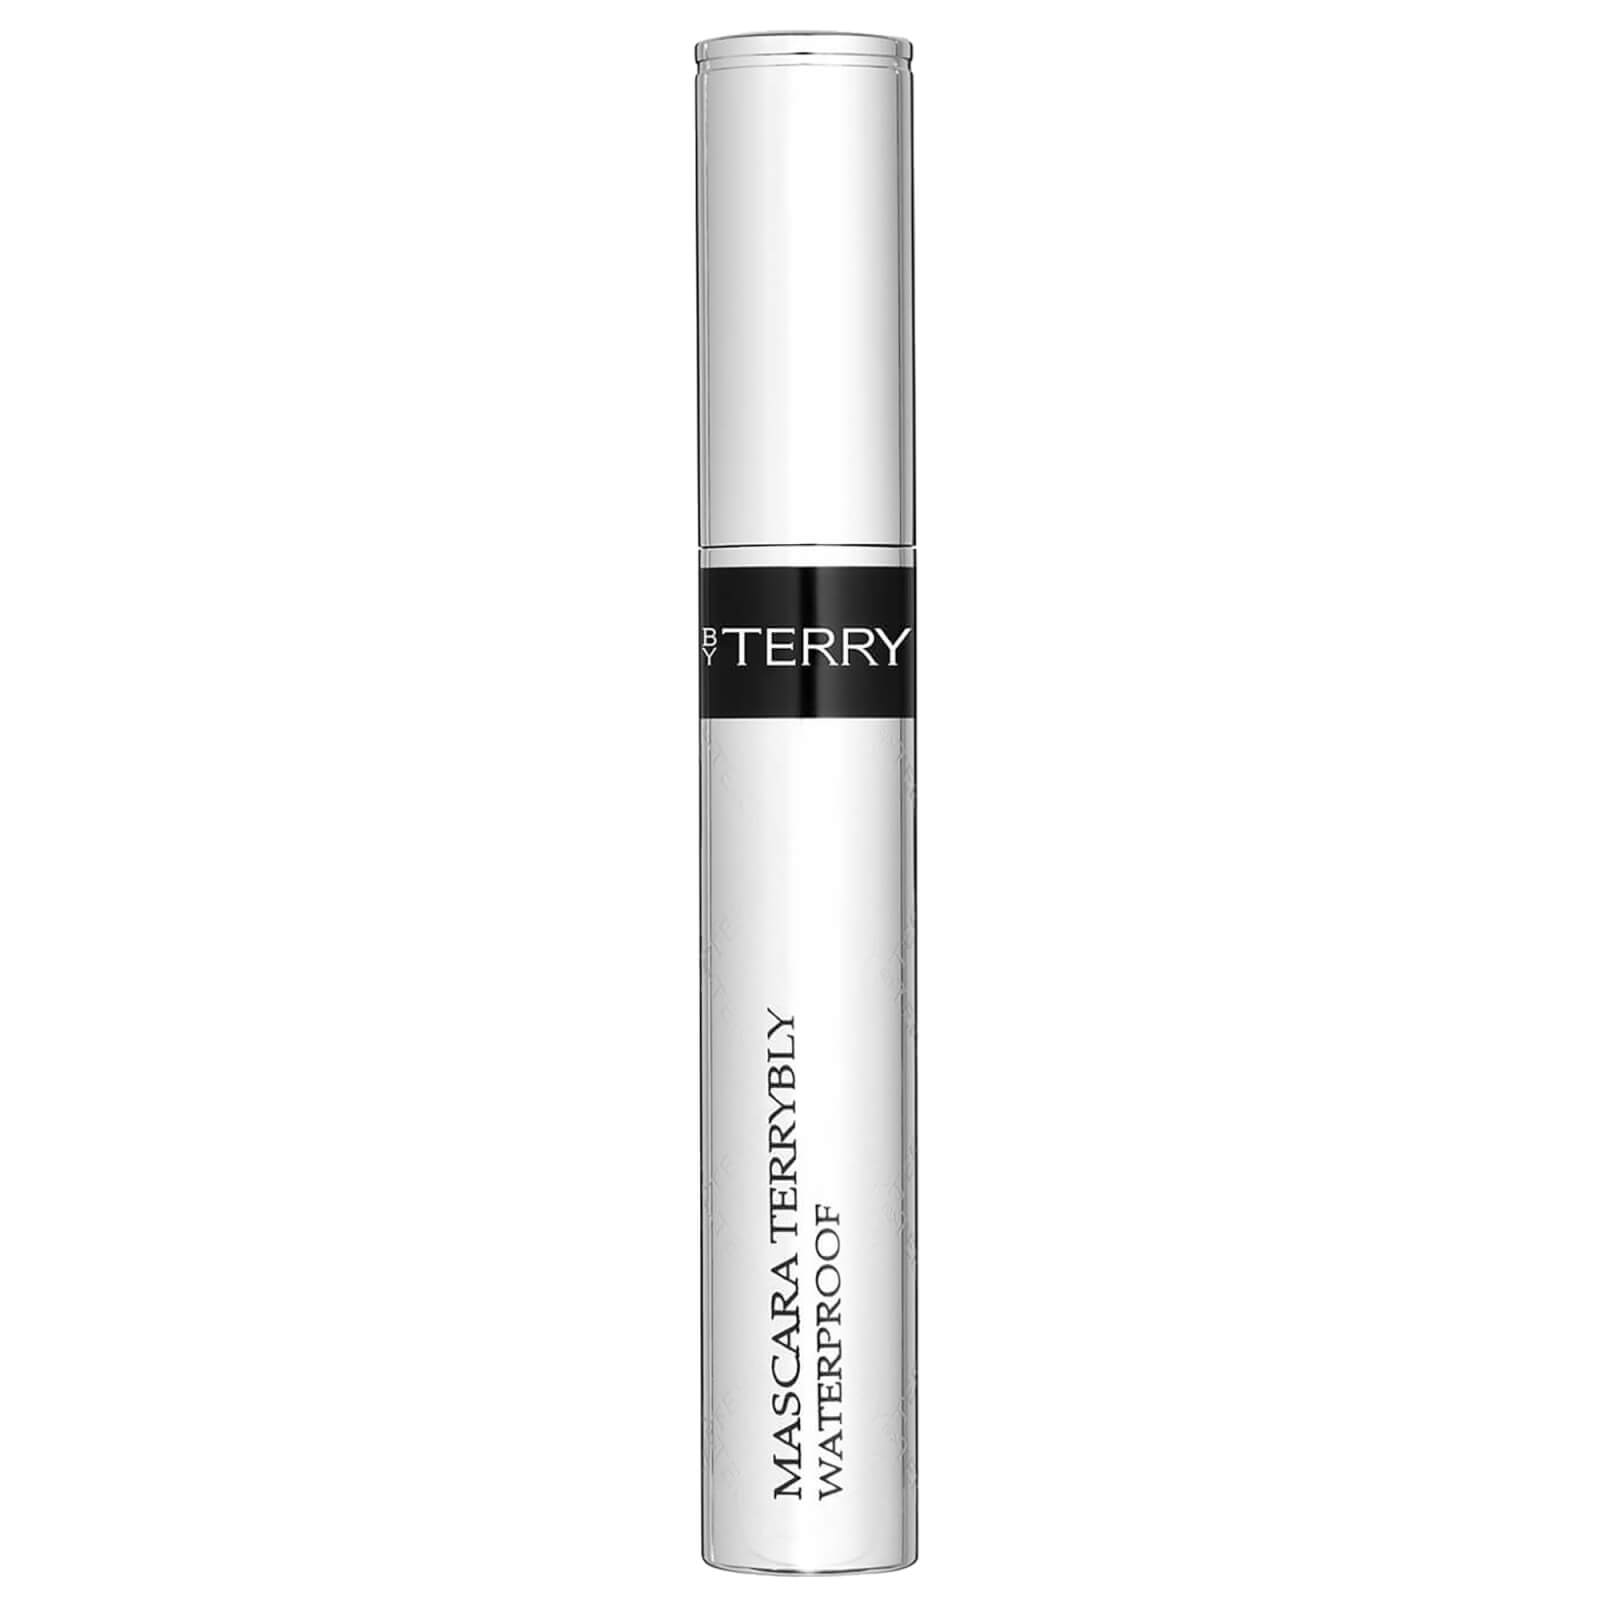 Image of By Terry Terrybly mascara waterproof - nero 8 g